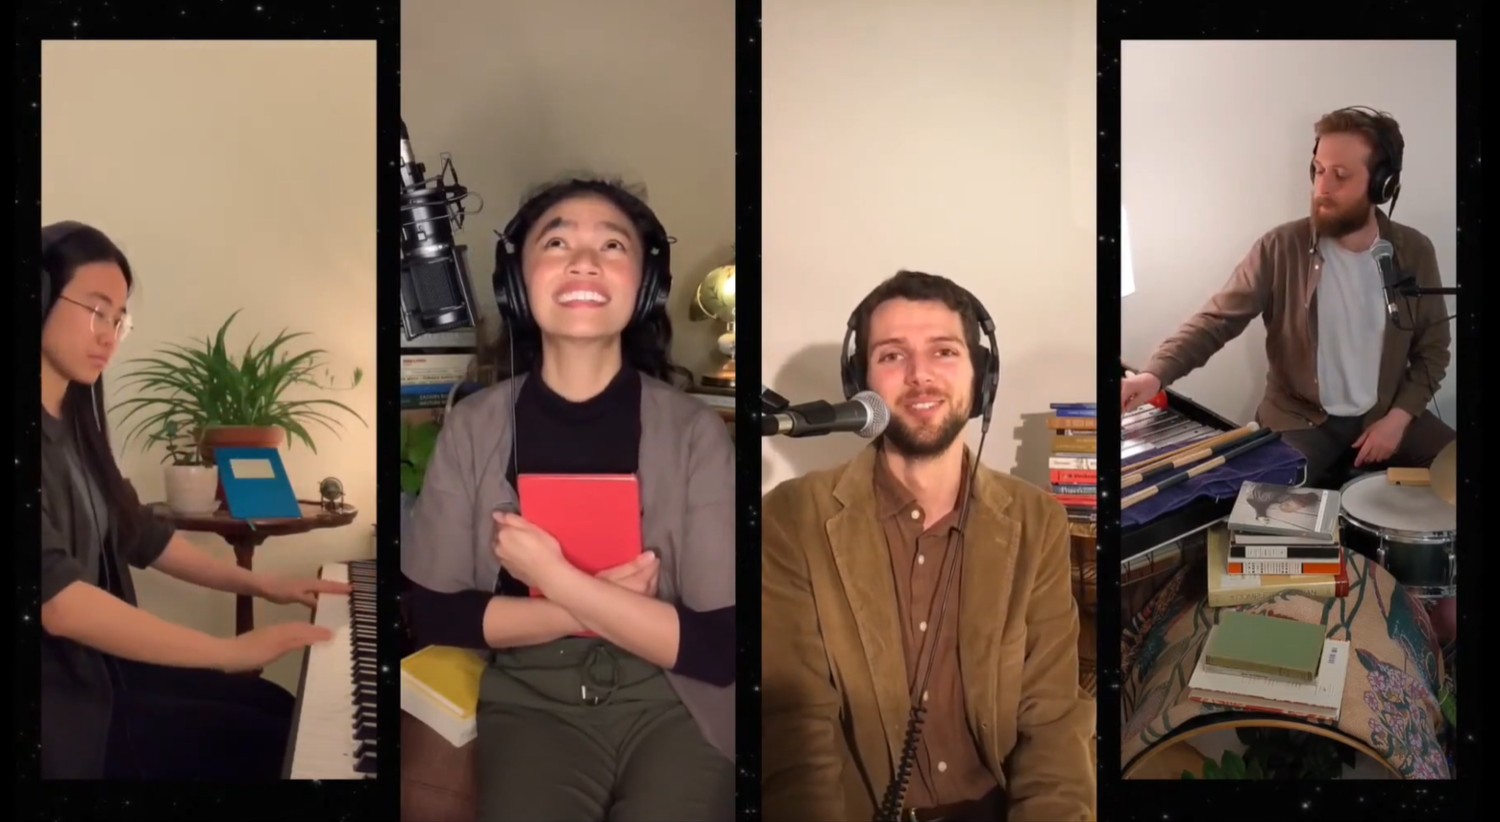 From left to right: pianist/vocalist Mingjia Chen, Belinda Corpuz as Ursa, Sam Boer as Bear, and drummer/vocalist Jake Schindler.Alt text: A split screen of a woman at a piano with a plant nearby, a woman clutching a red book looking at the sky, a man smiling at the camera with books in the background, a man at a drum kit with a stack of books between his legs.